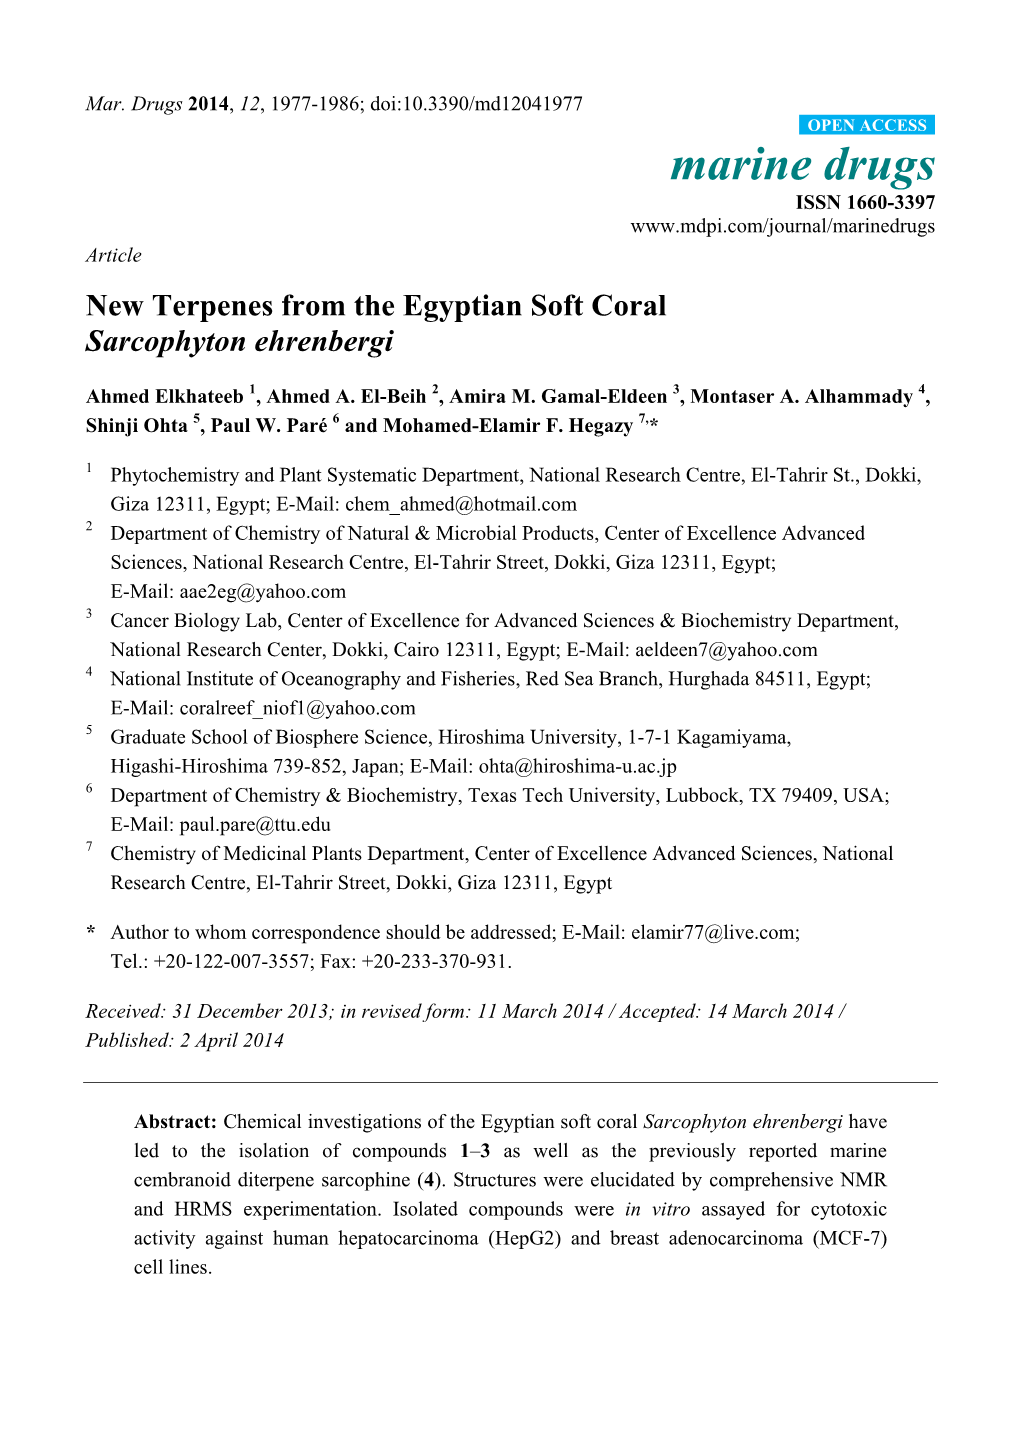 New Terpenes from the Egyptian Soft Coral Sarcophyton Ehrenbergi